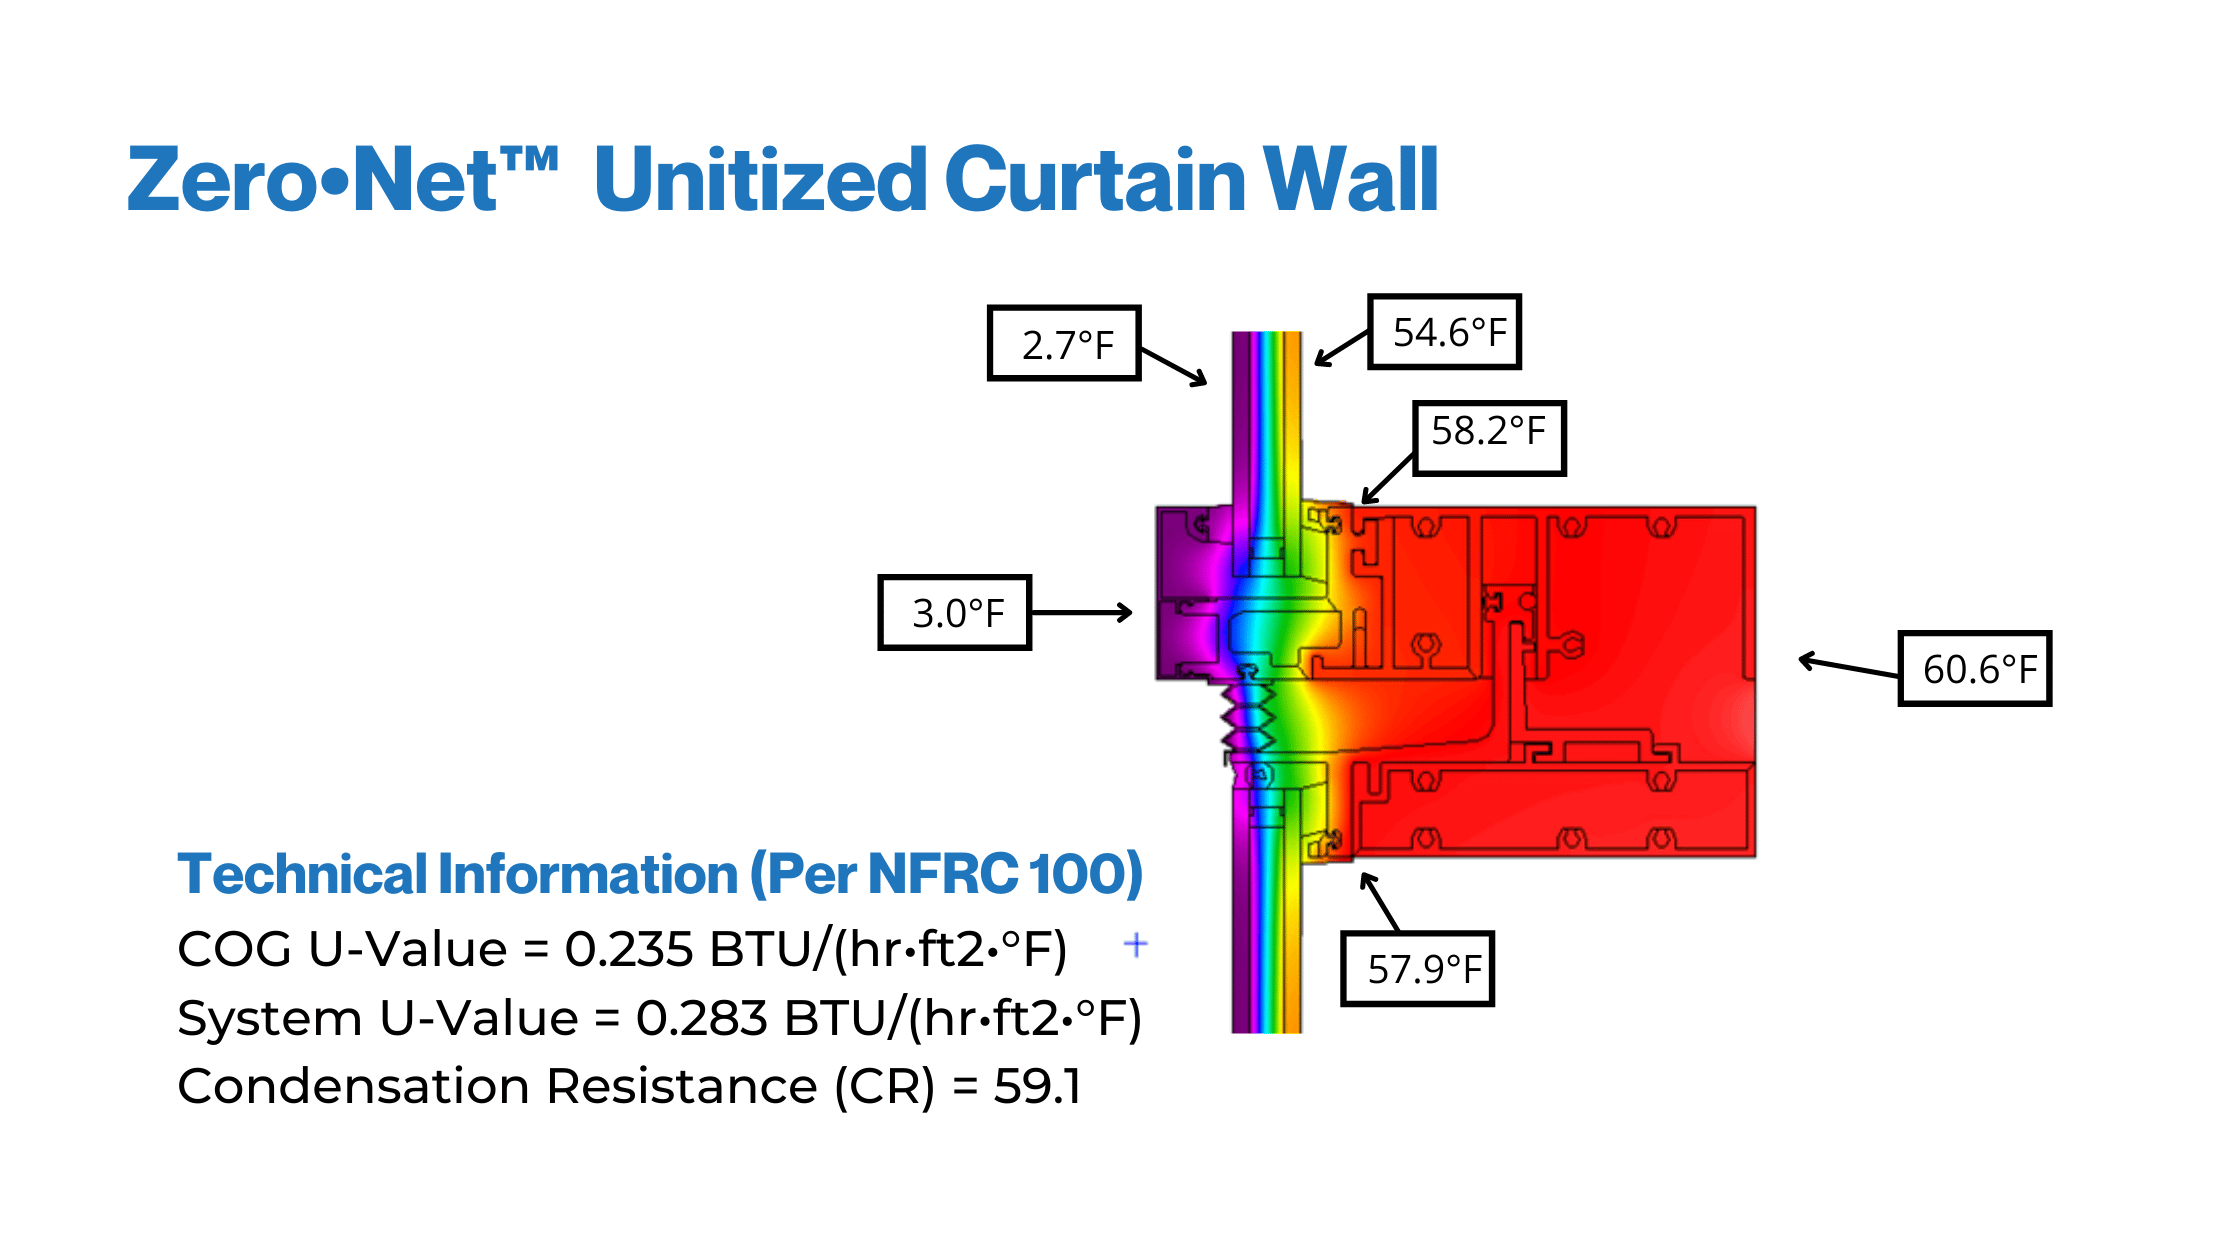 Unitized curtain wall thermal image